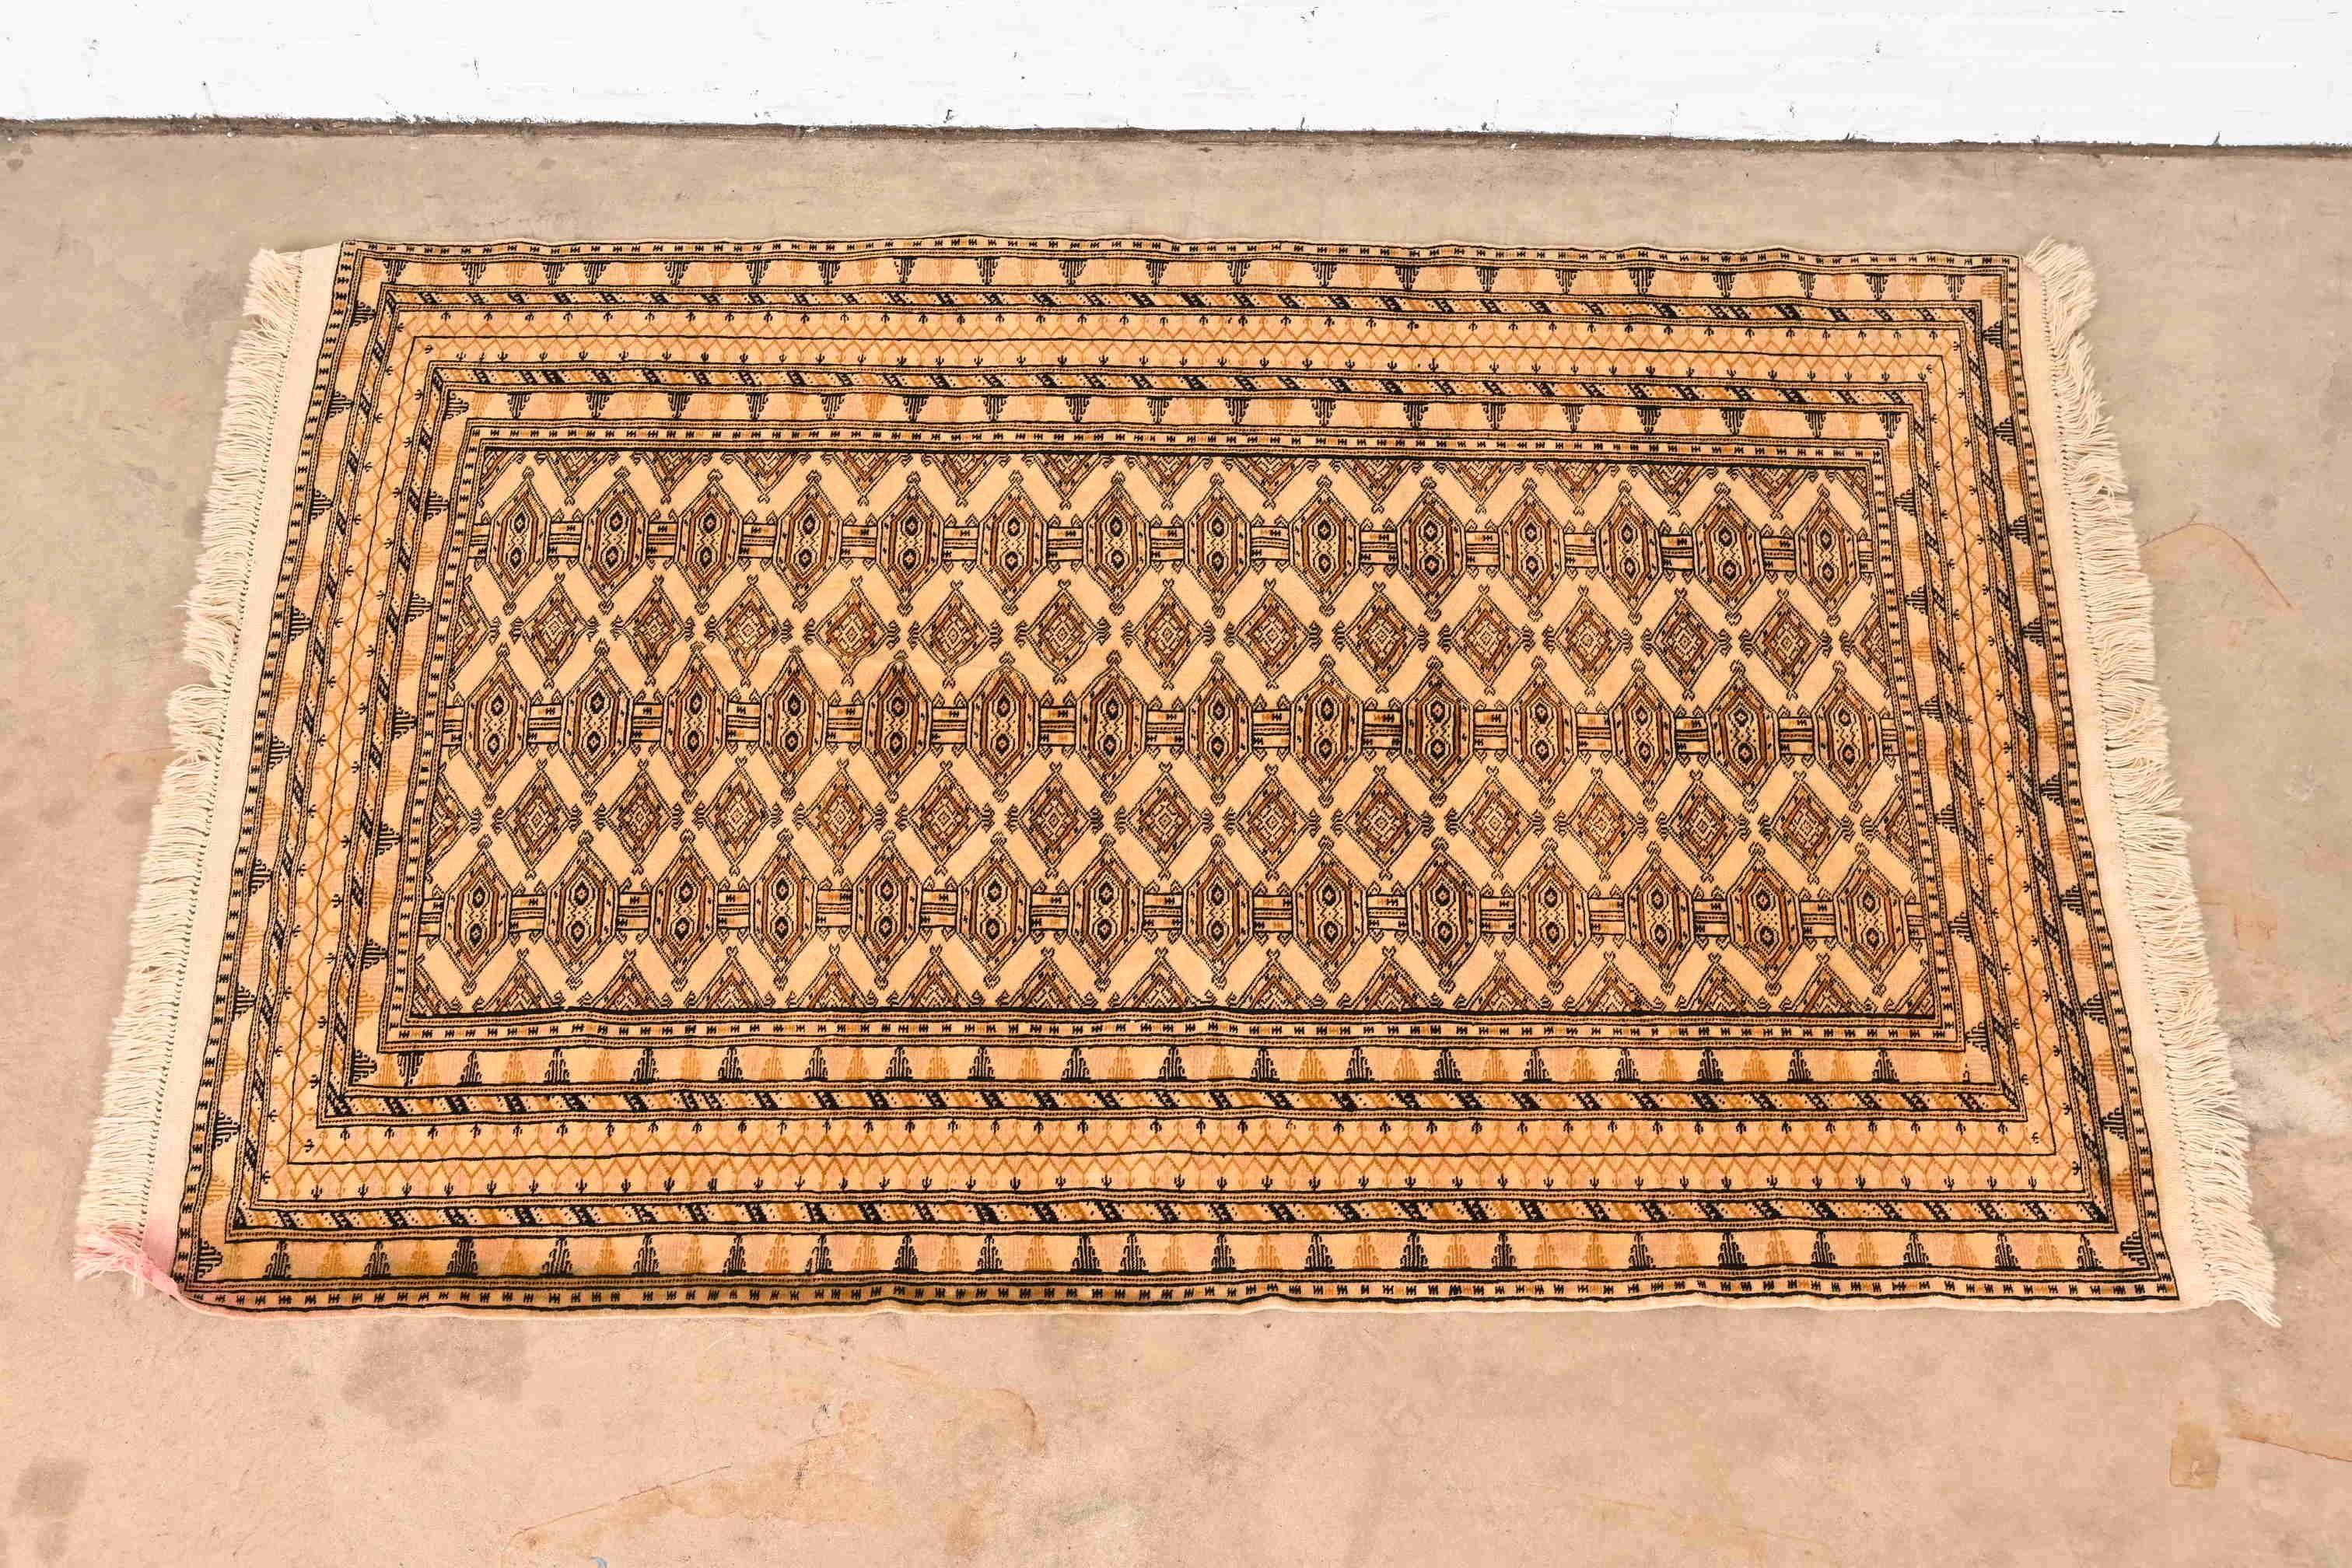 20th Century Vintage Hand-Woven Persian Bokhara Wool Rug in Gold and Black